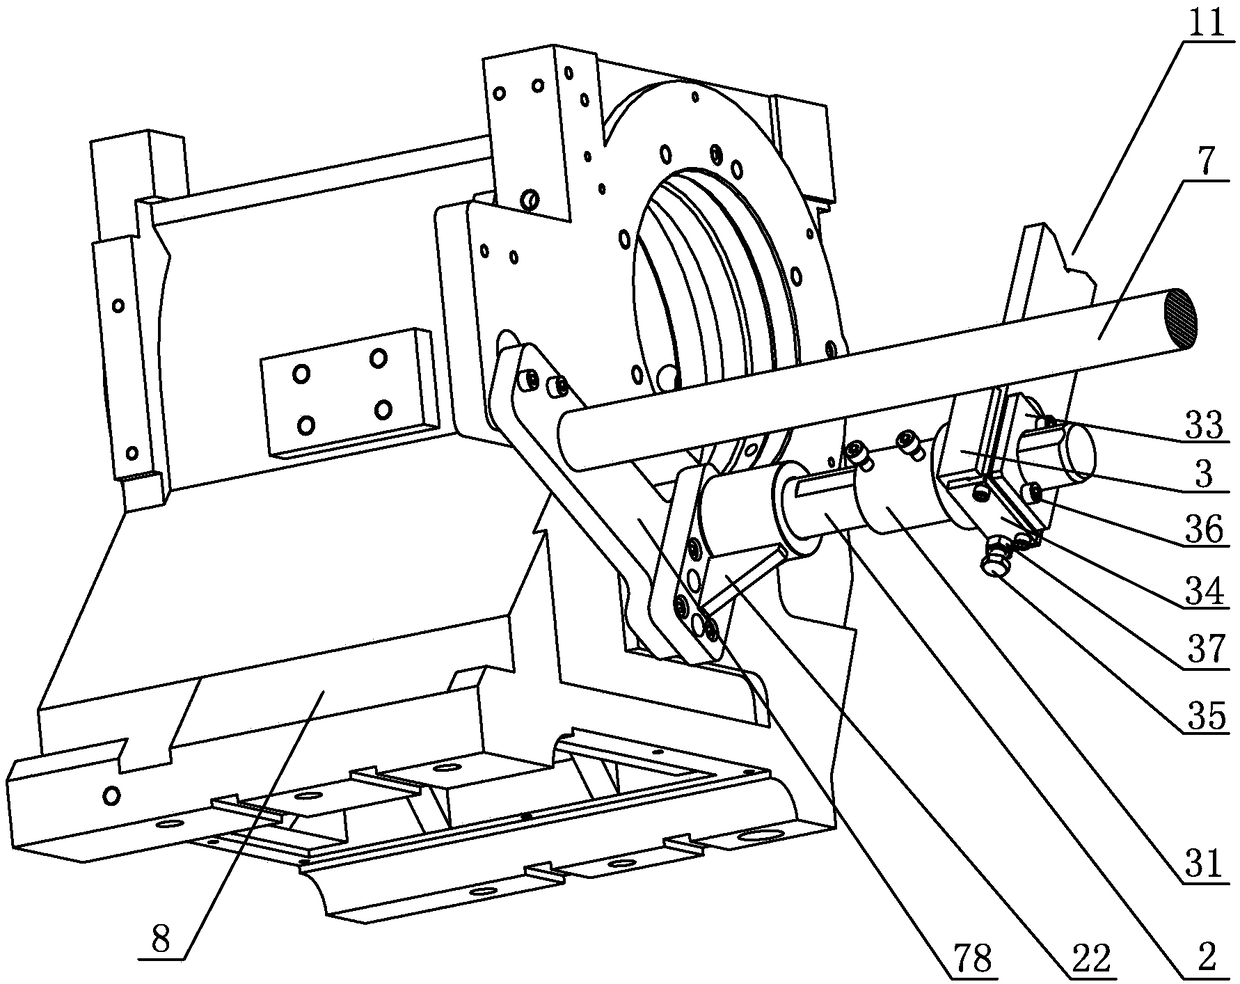 Numerical control lathe support frame